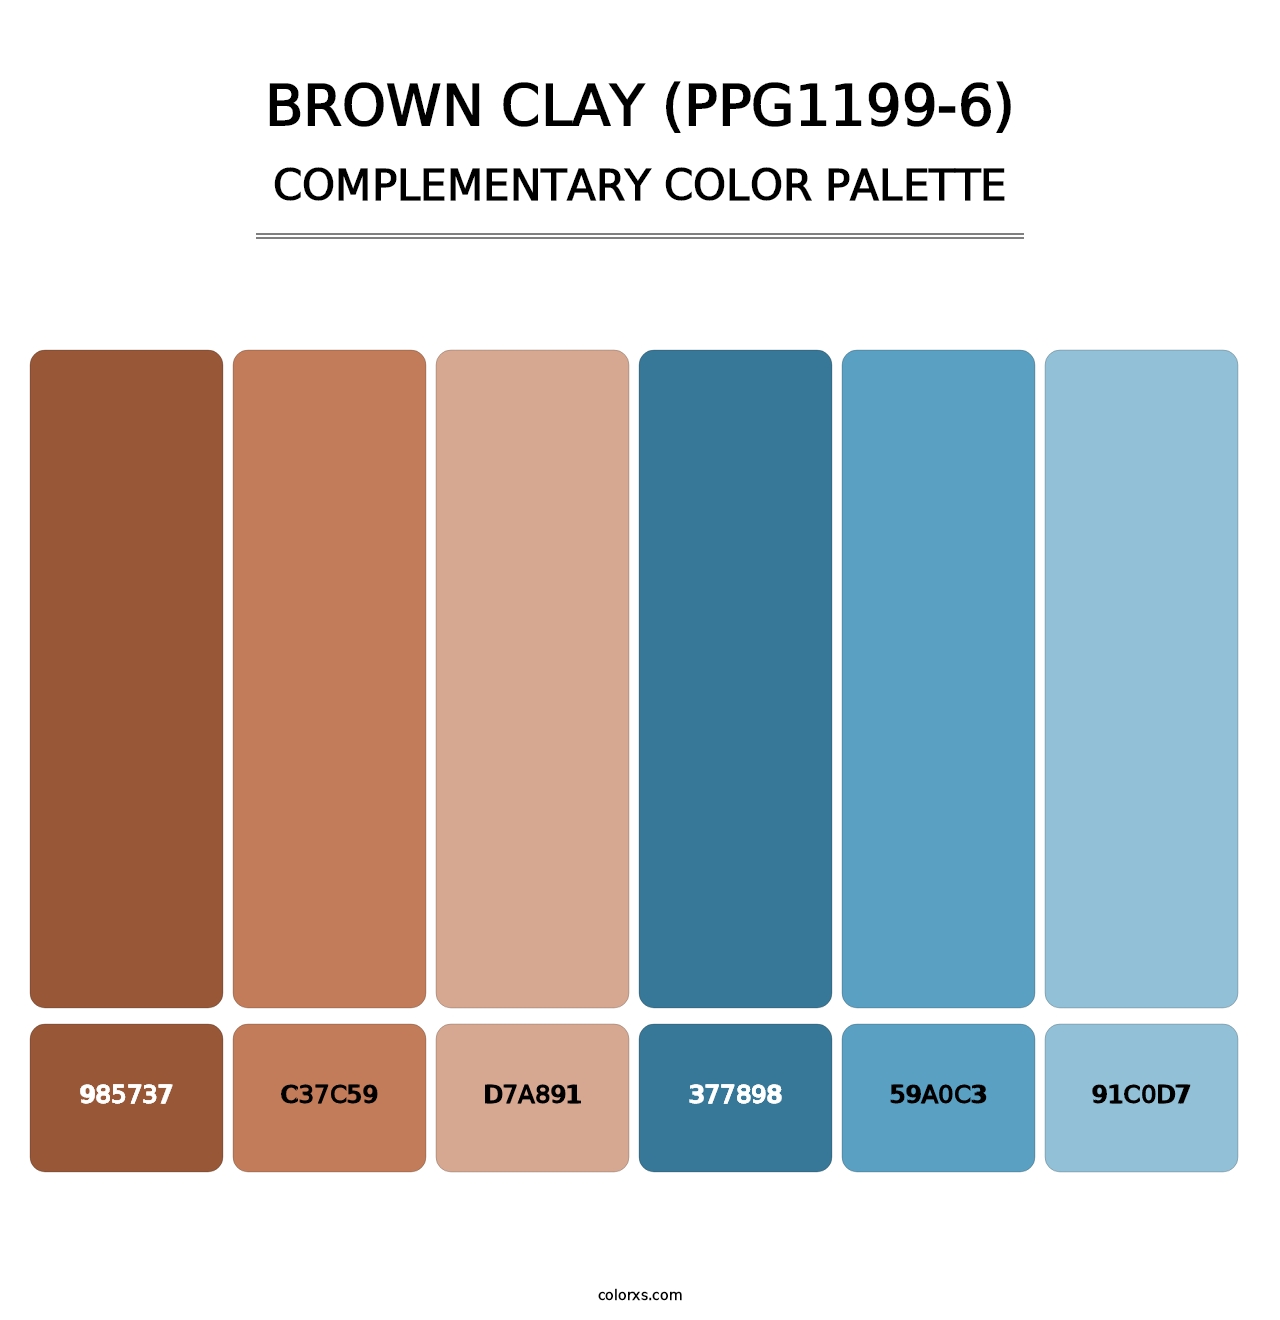 Brown Clay (PPG1199-6) - Complementary Color Palette